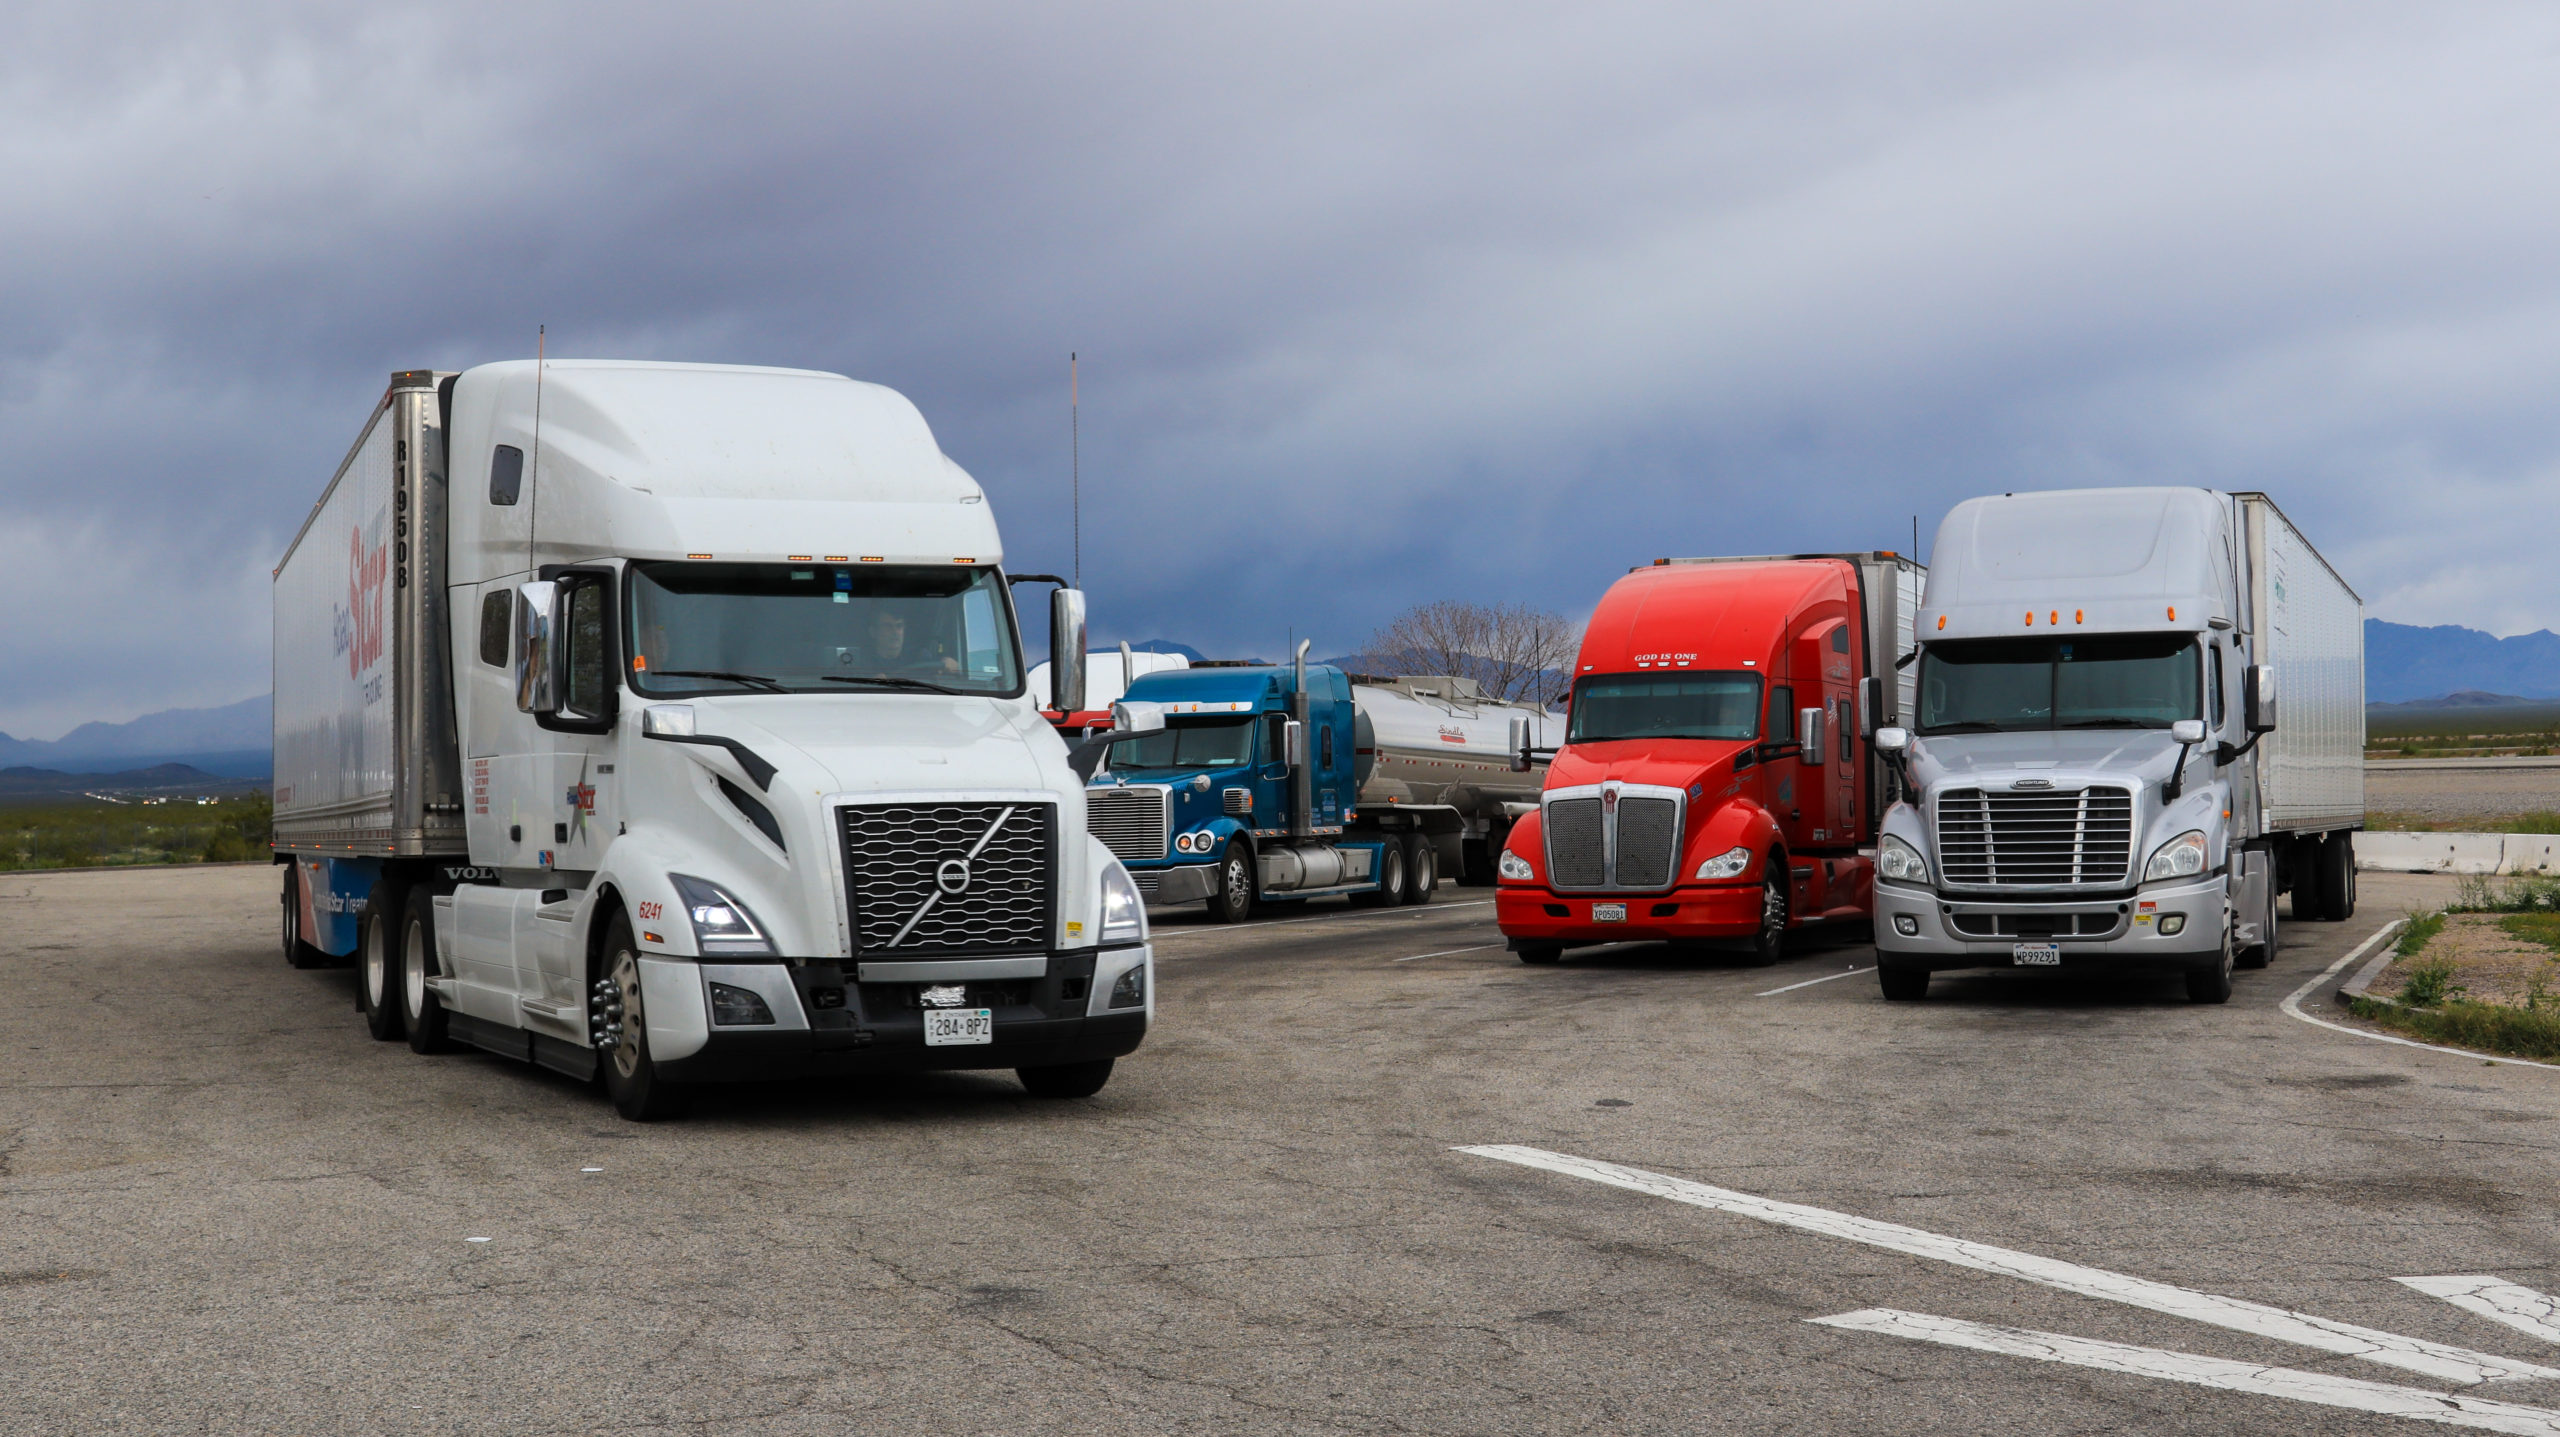 Mandatory training will improve safety for commercial drivers